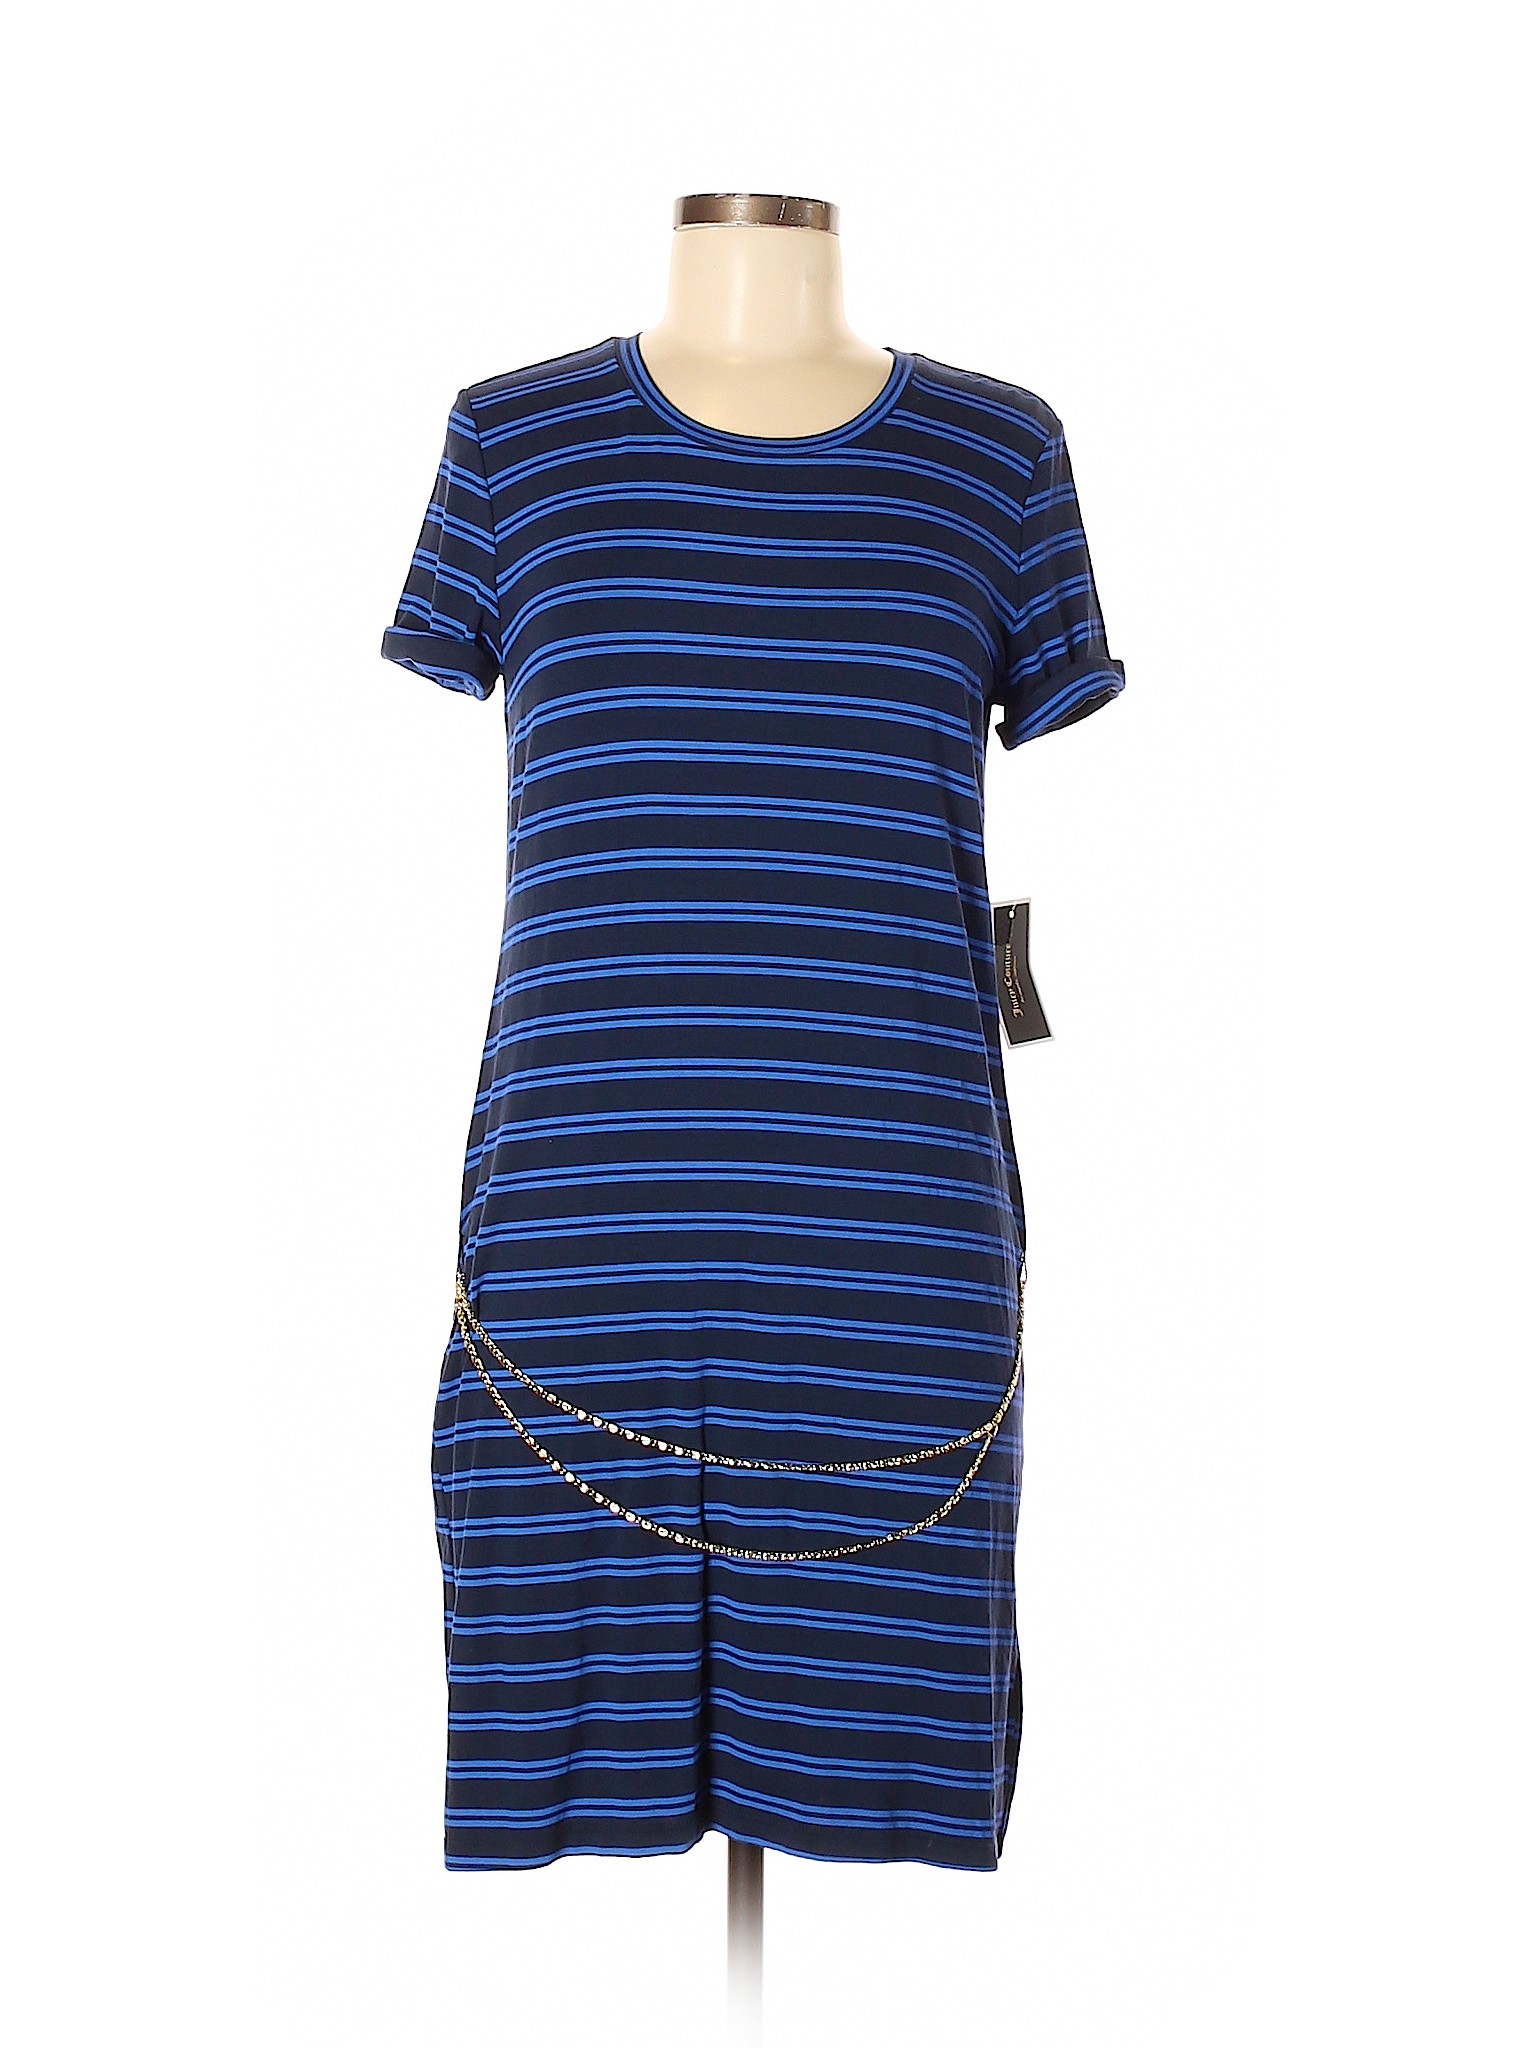 Juicy Couture Stripes Blue Casual Dress Size M - 88% off | thredUP